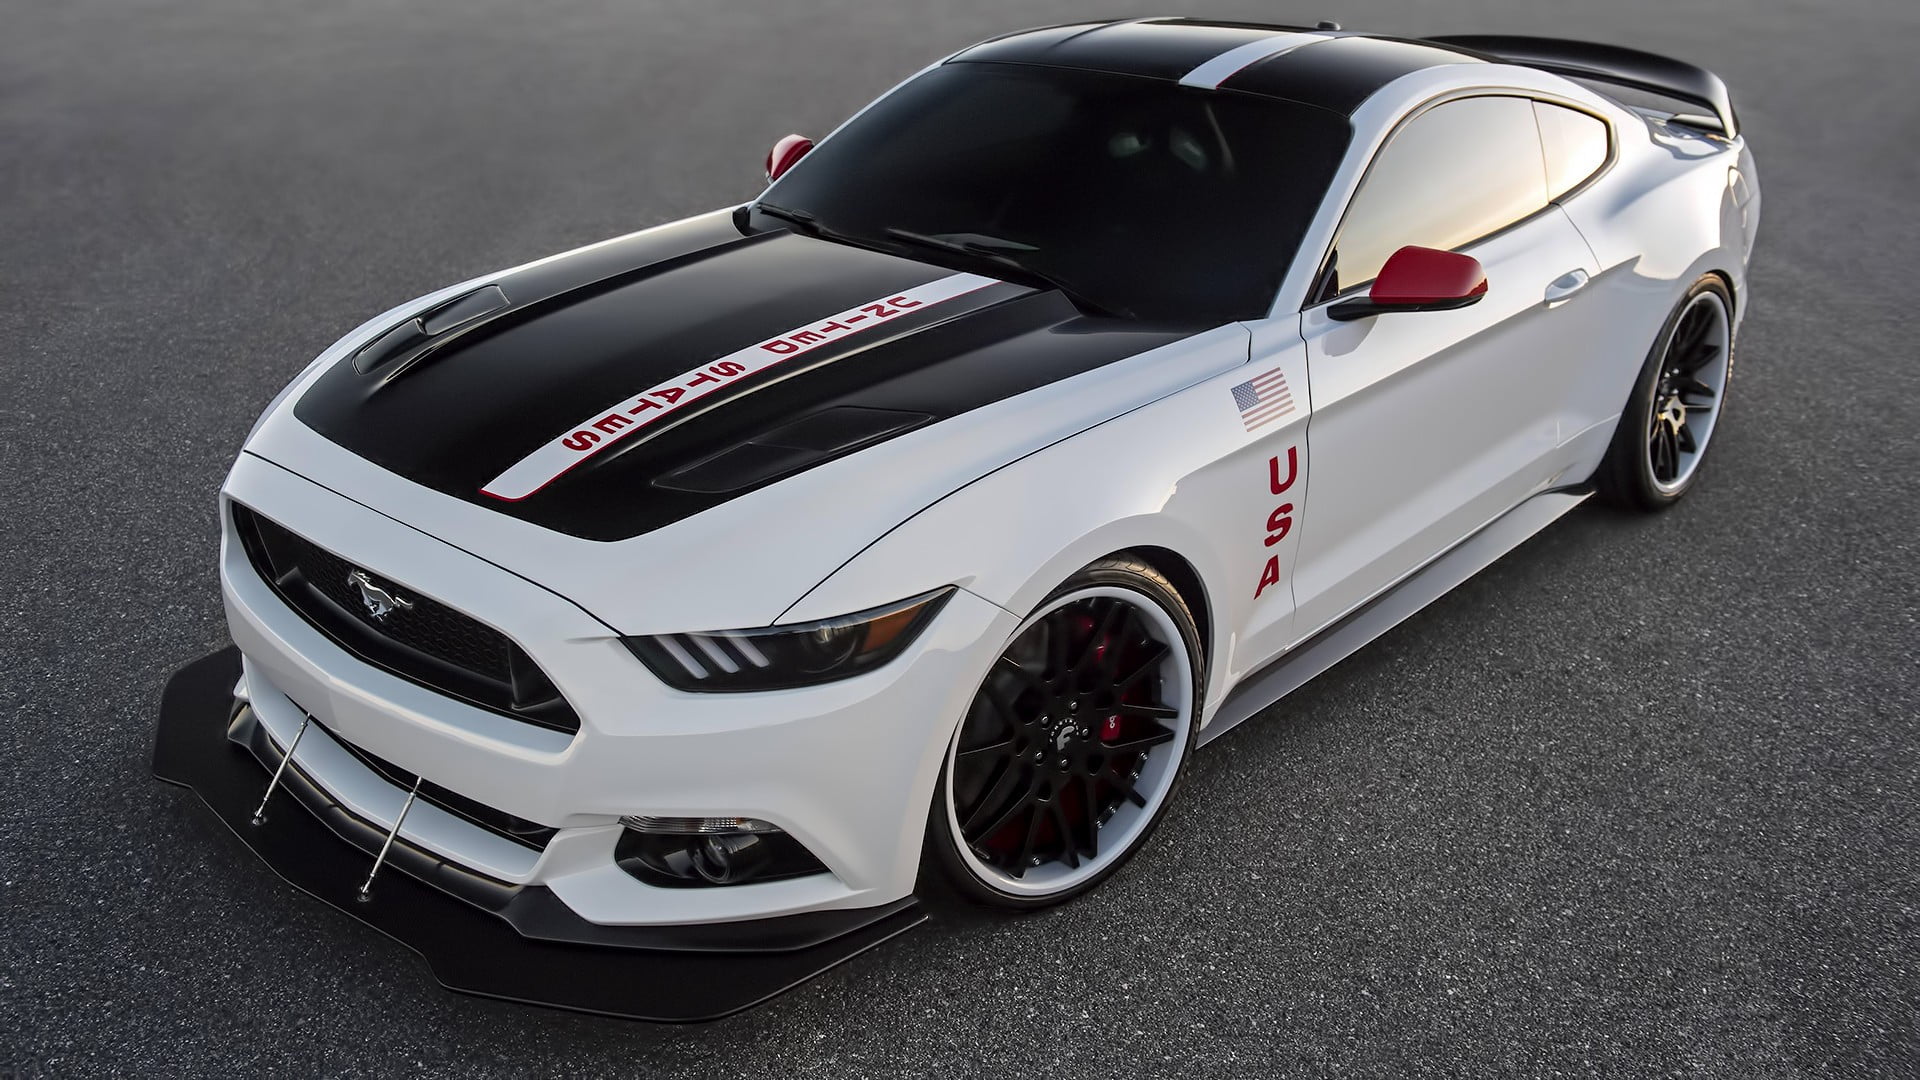 White And Black Ford Mustang Coupe Car Ford Mustang Ford Mustang Gt Apollo Edition White Cars Hd Wallpaper Wallpaper Flare